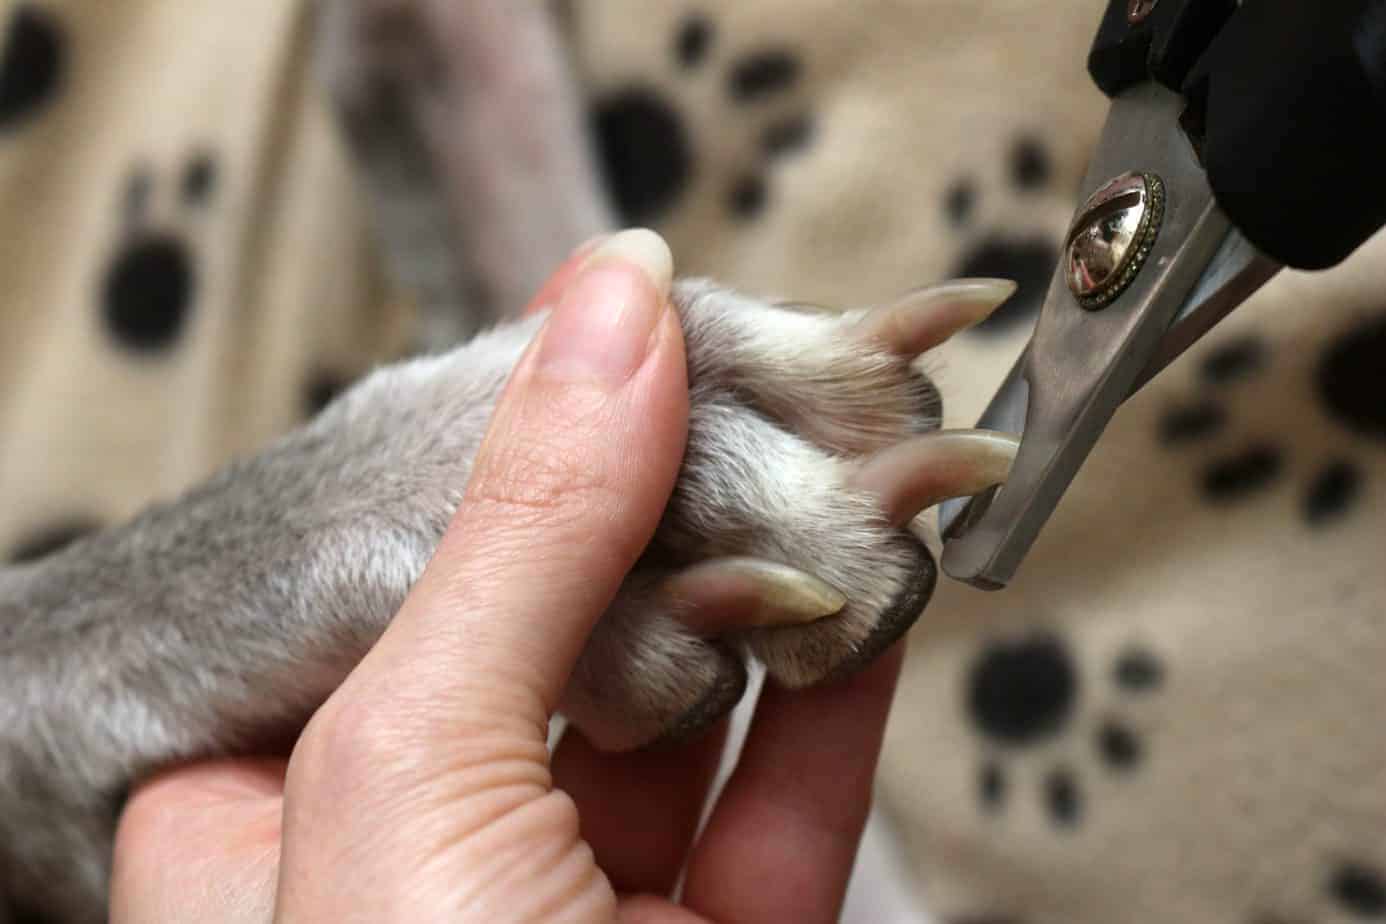 The Ultimate Hack To Safely Trim Your Dog's Long Nails And Avoid Hurting Them!